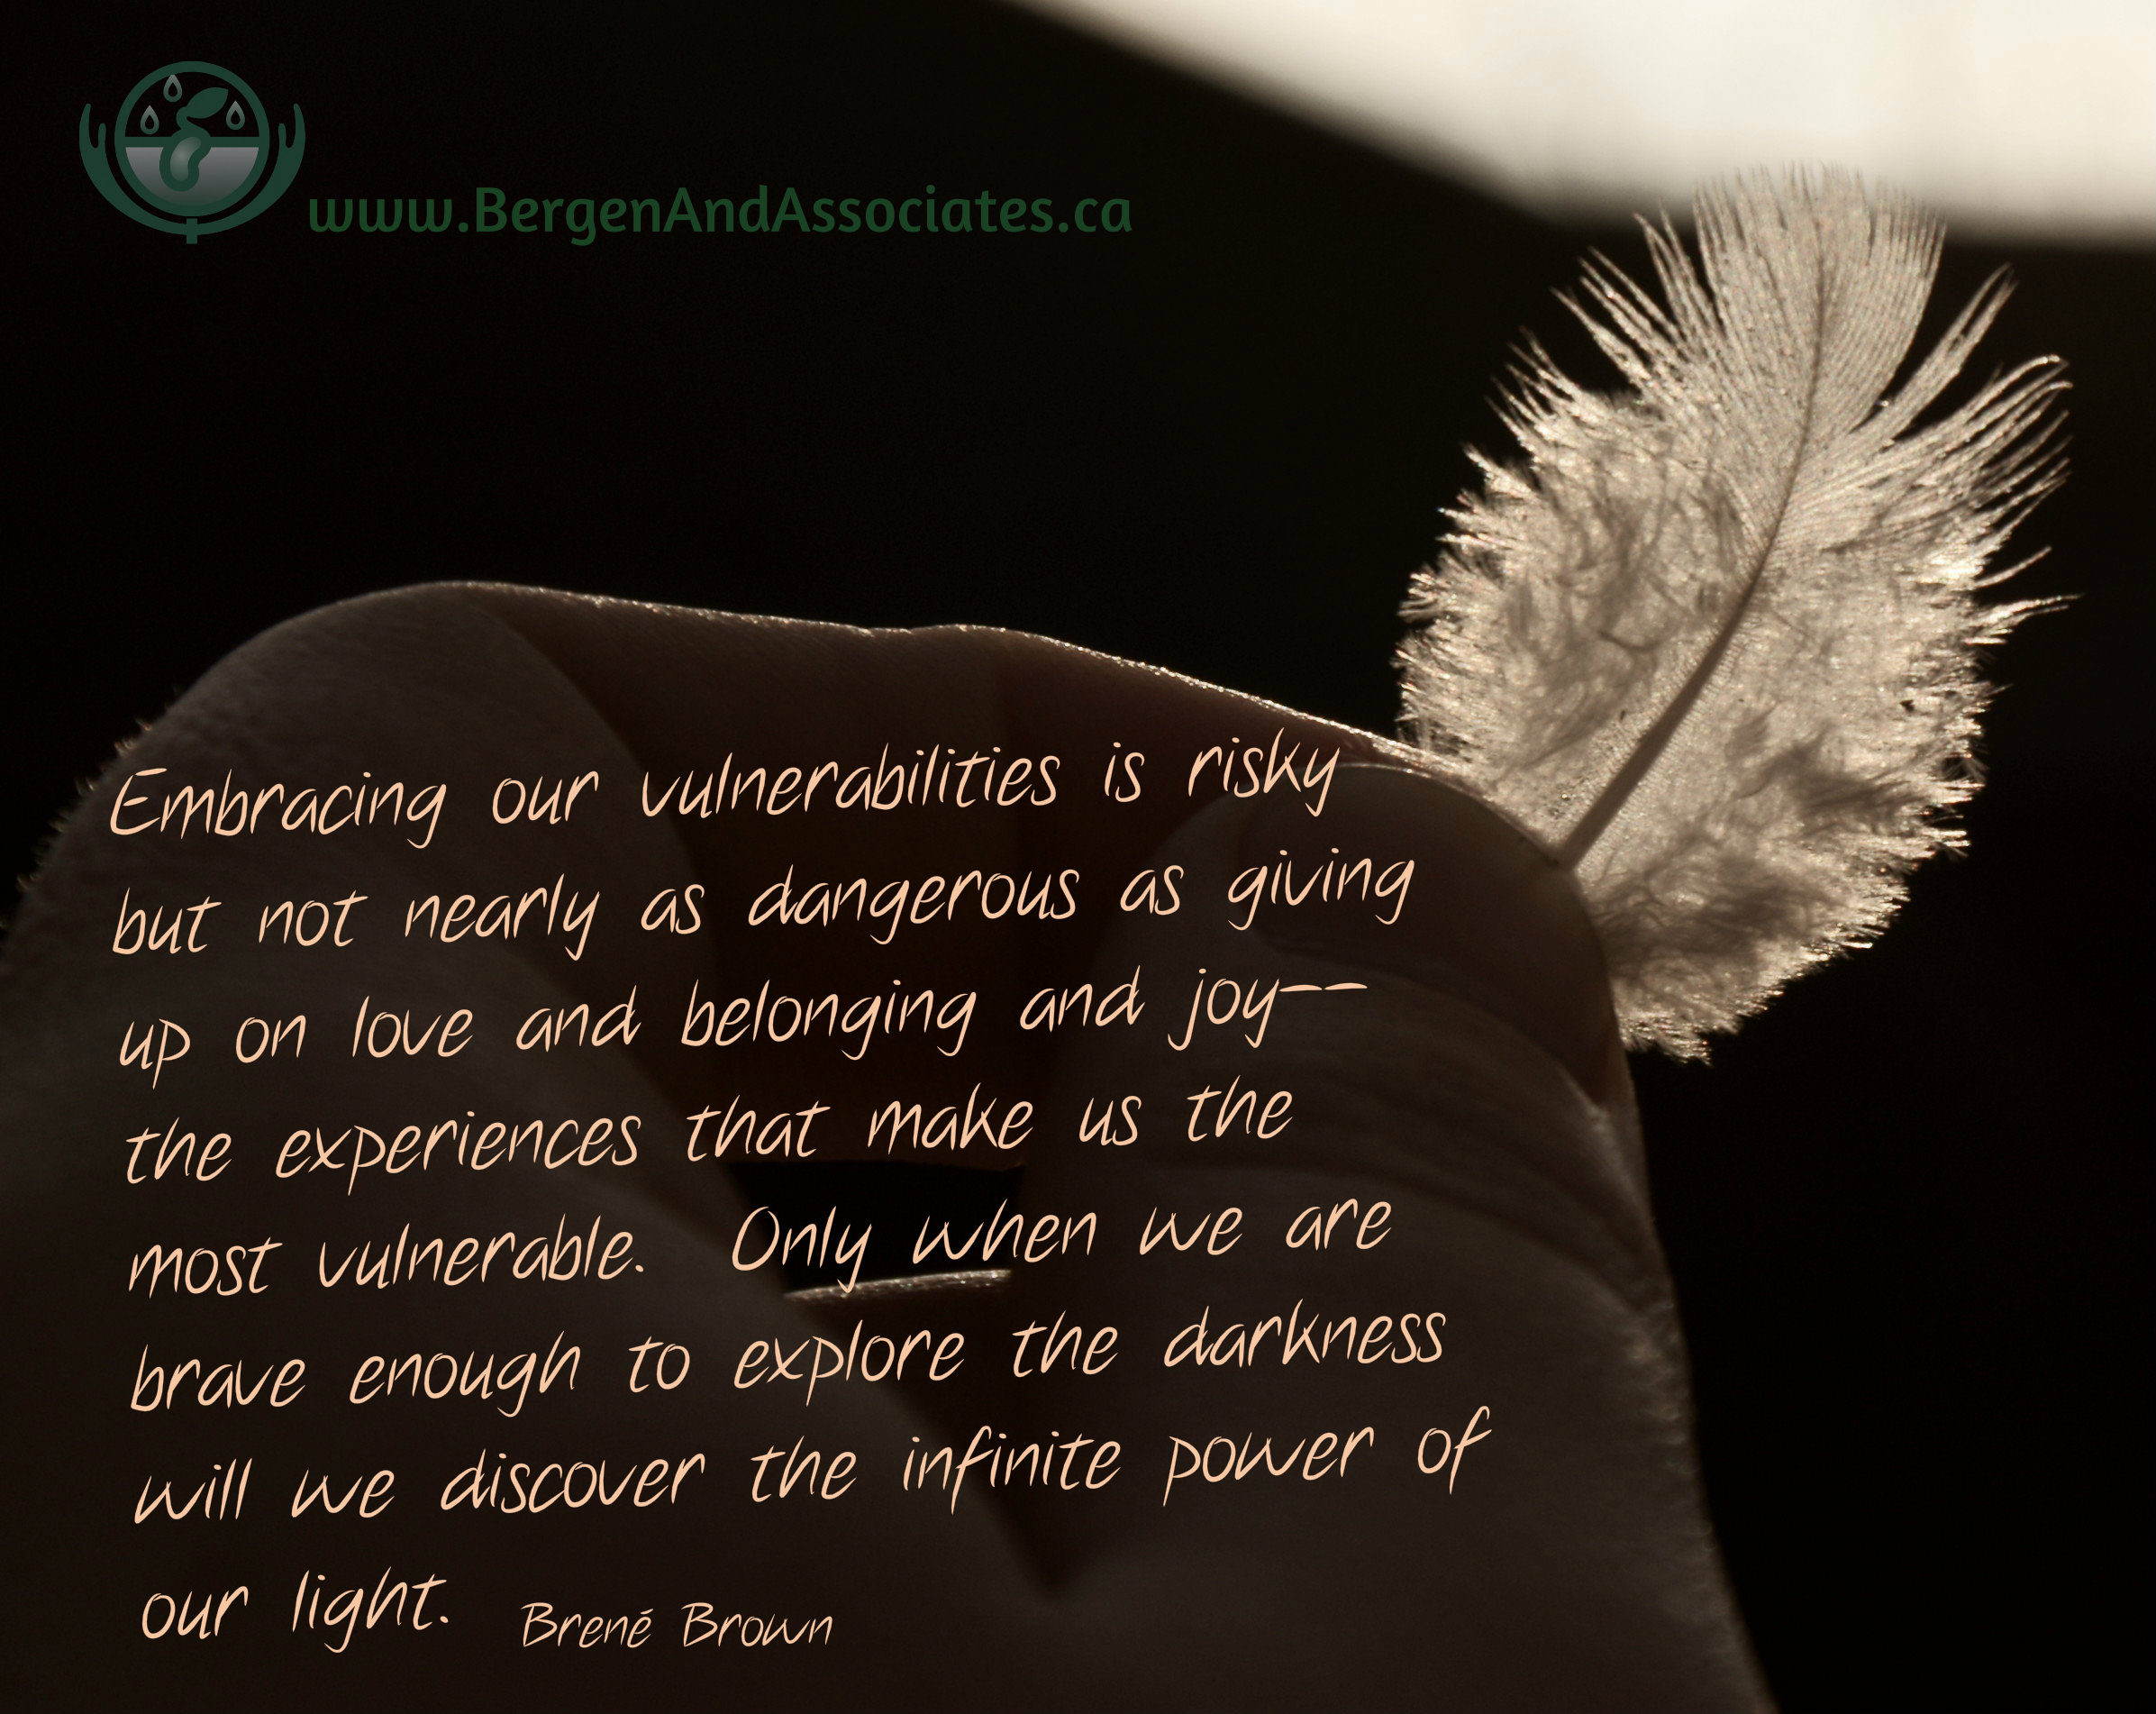 Staying vulnerable is risky, but not nearly as dangerous as giving up on love belonging and joy - the experiences that make us the most vulnerable. Only when we are brave enough to explore the darkness will we discover the infinte power of our light. A quote by brene brown.